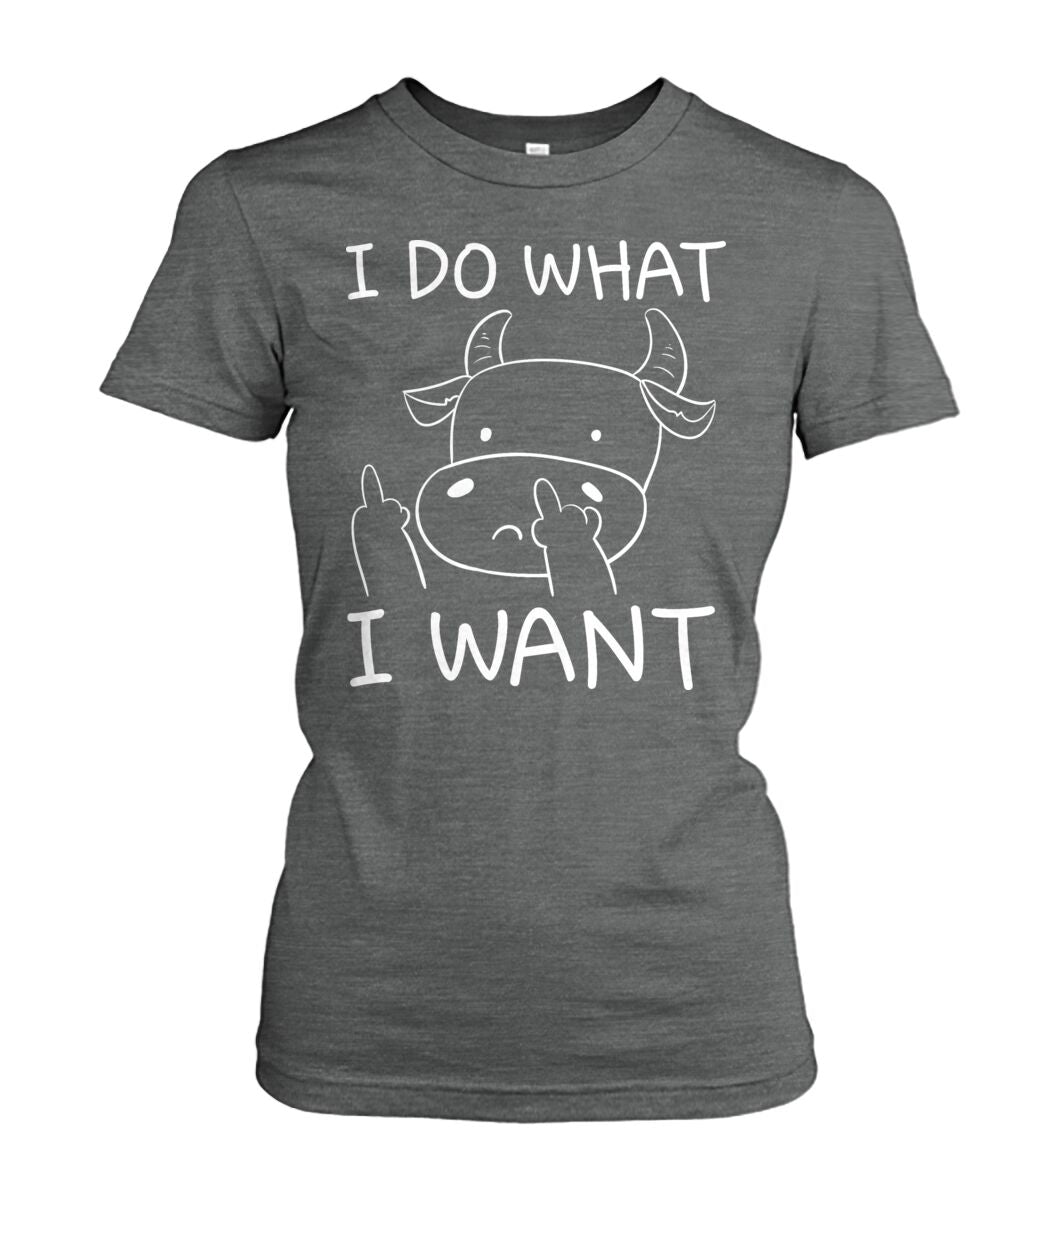 I do what i want - Men's and Women's t-shirt , Vneck, Hoodies - myfunfarm - clothing acceessories shoes for cow lovers, pig, horse, cat, sheep, dog, chicken, goat farmer